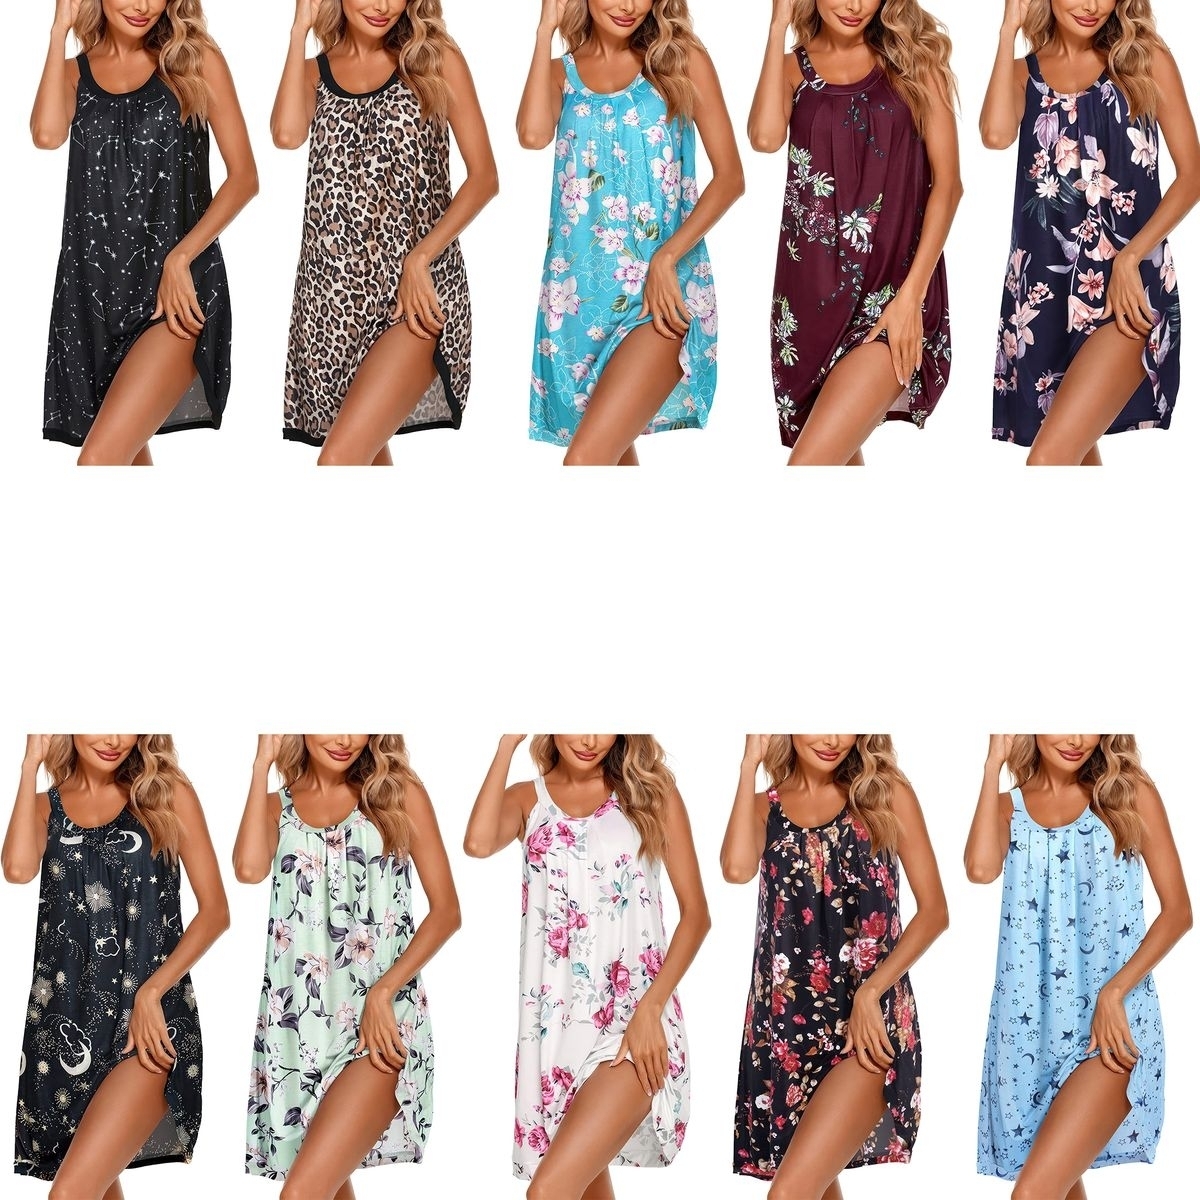 4-Pack: Women's Ultra-Soft Cozy Sleeveless Loose Fit Lightweight Cozy Nightgown SleepShirt - Large, Floral